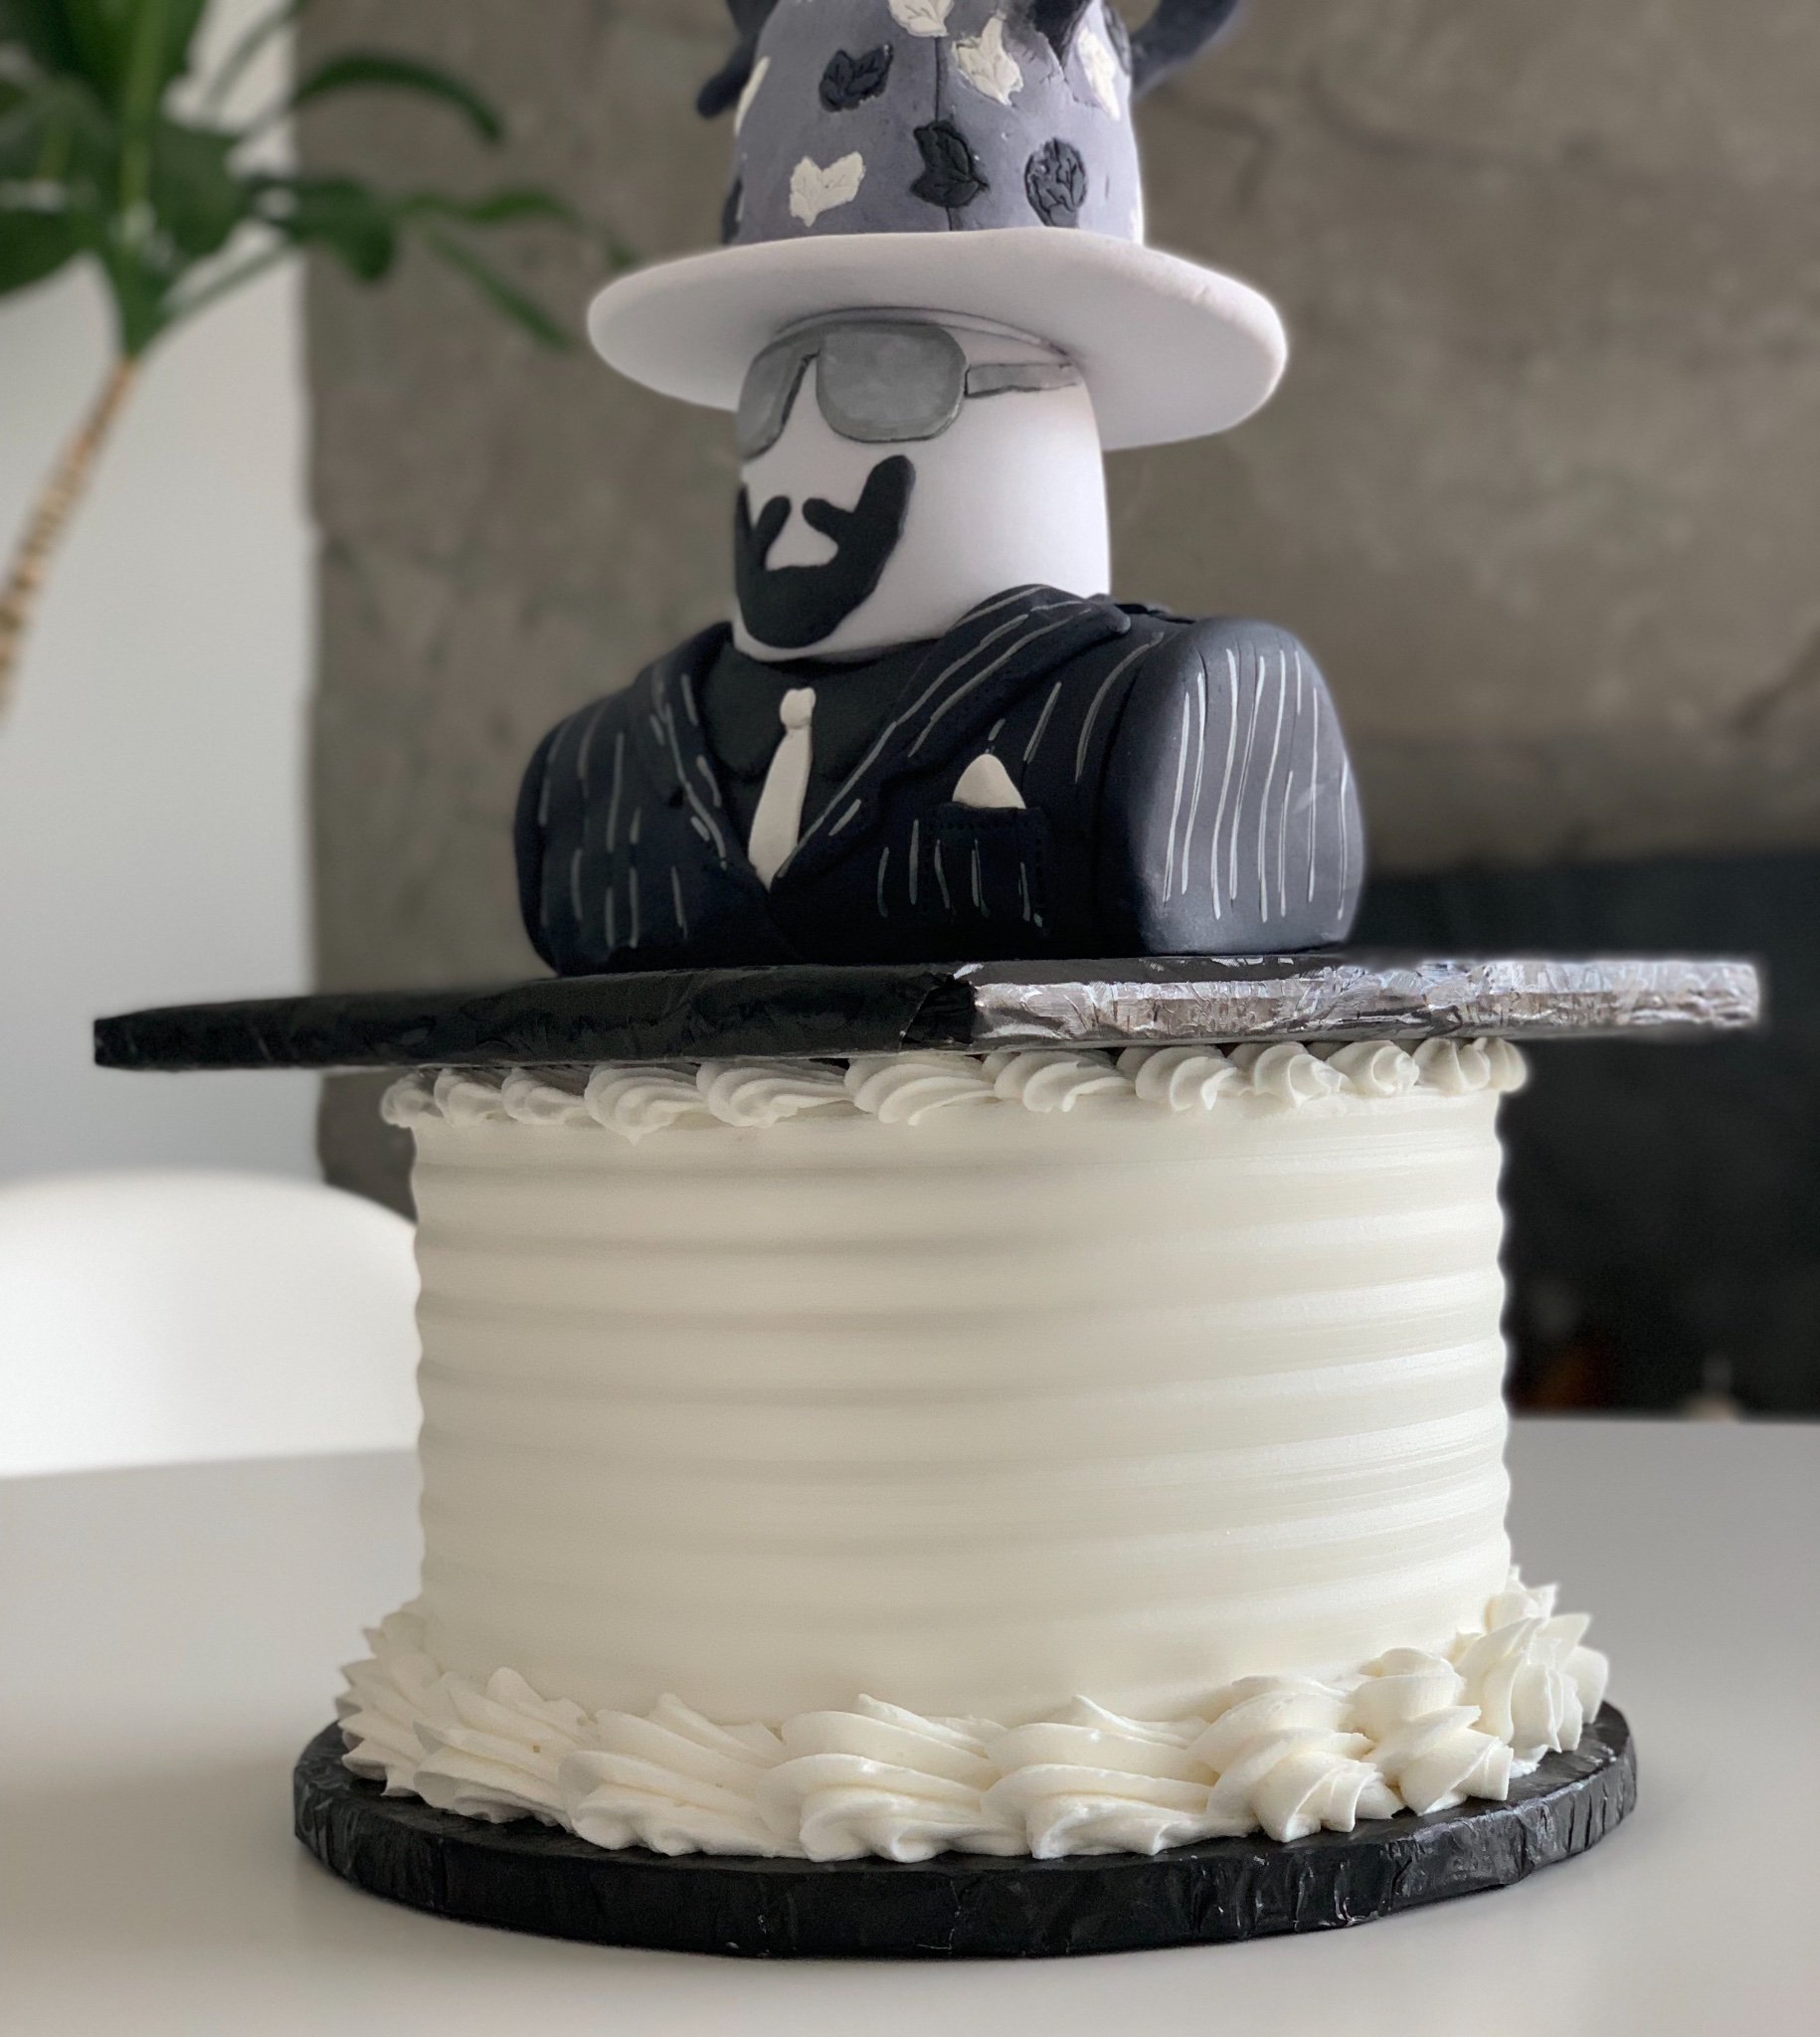 Asimo3089 On Twitter Best Cake Ever Roblox - asimo3089 on twitter best cake ever at roblox